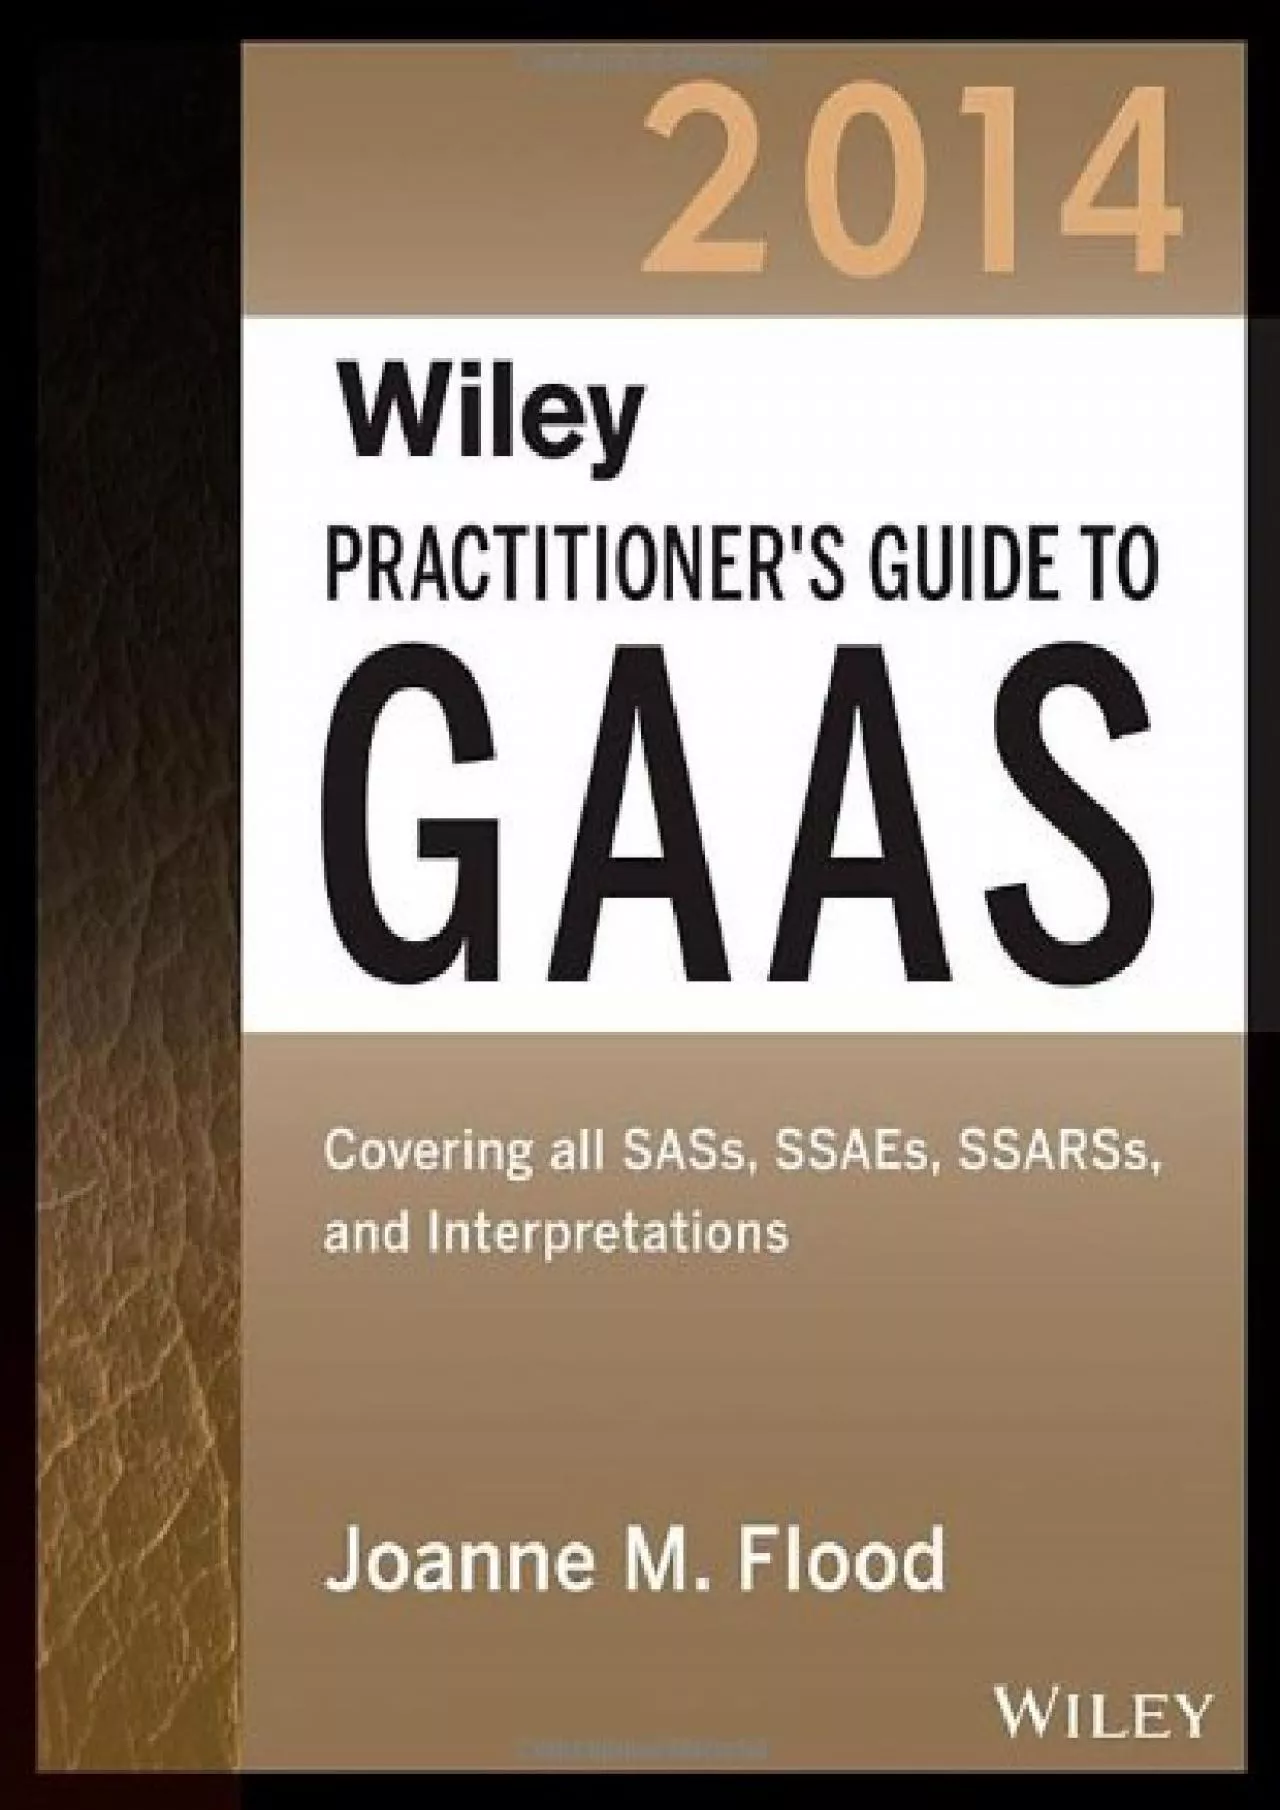 (EBOOK)-Wiley Practitioner\'s Guide to GAAS 2014: Covering all SASs, SSAEs, SSARSs, and